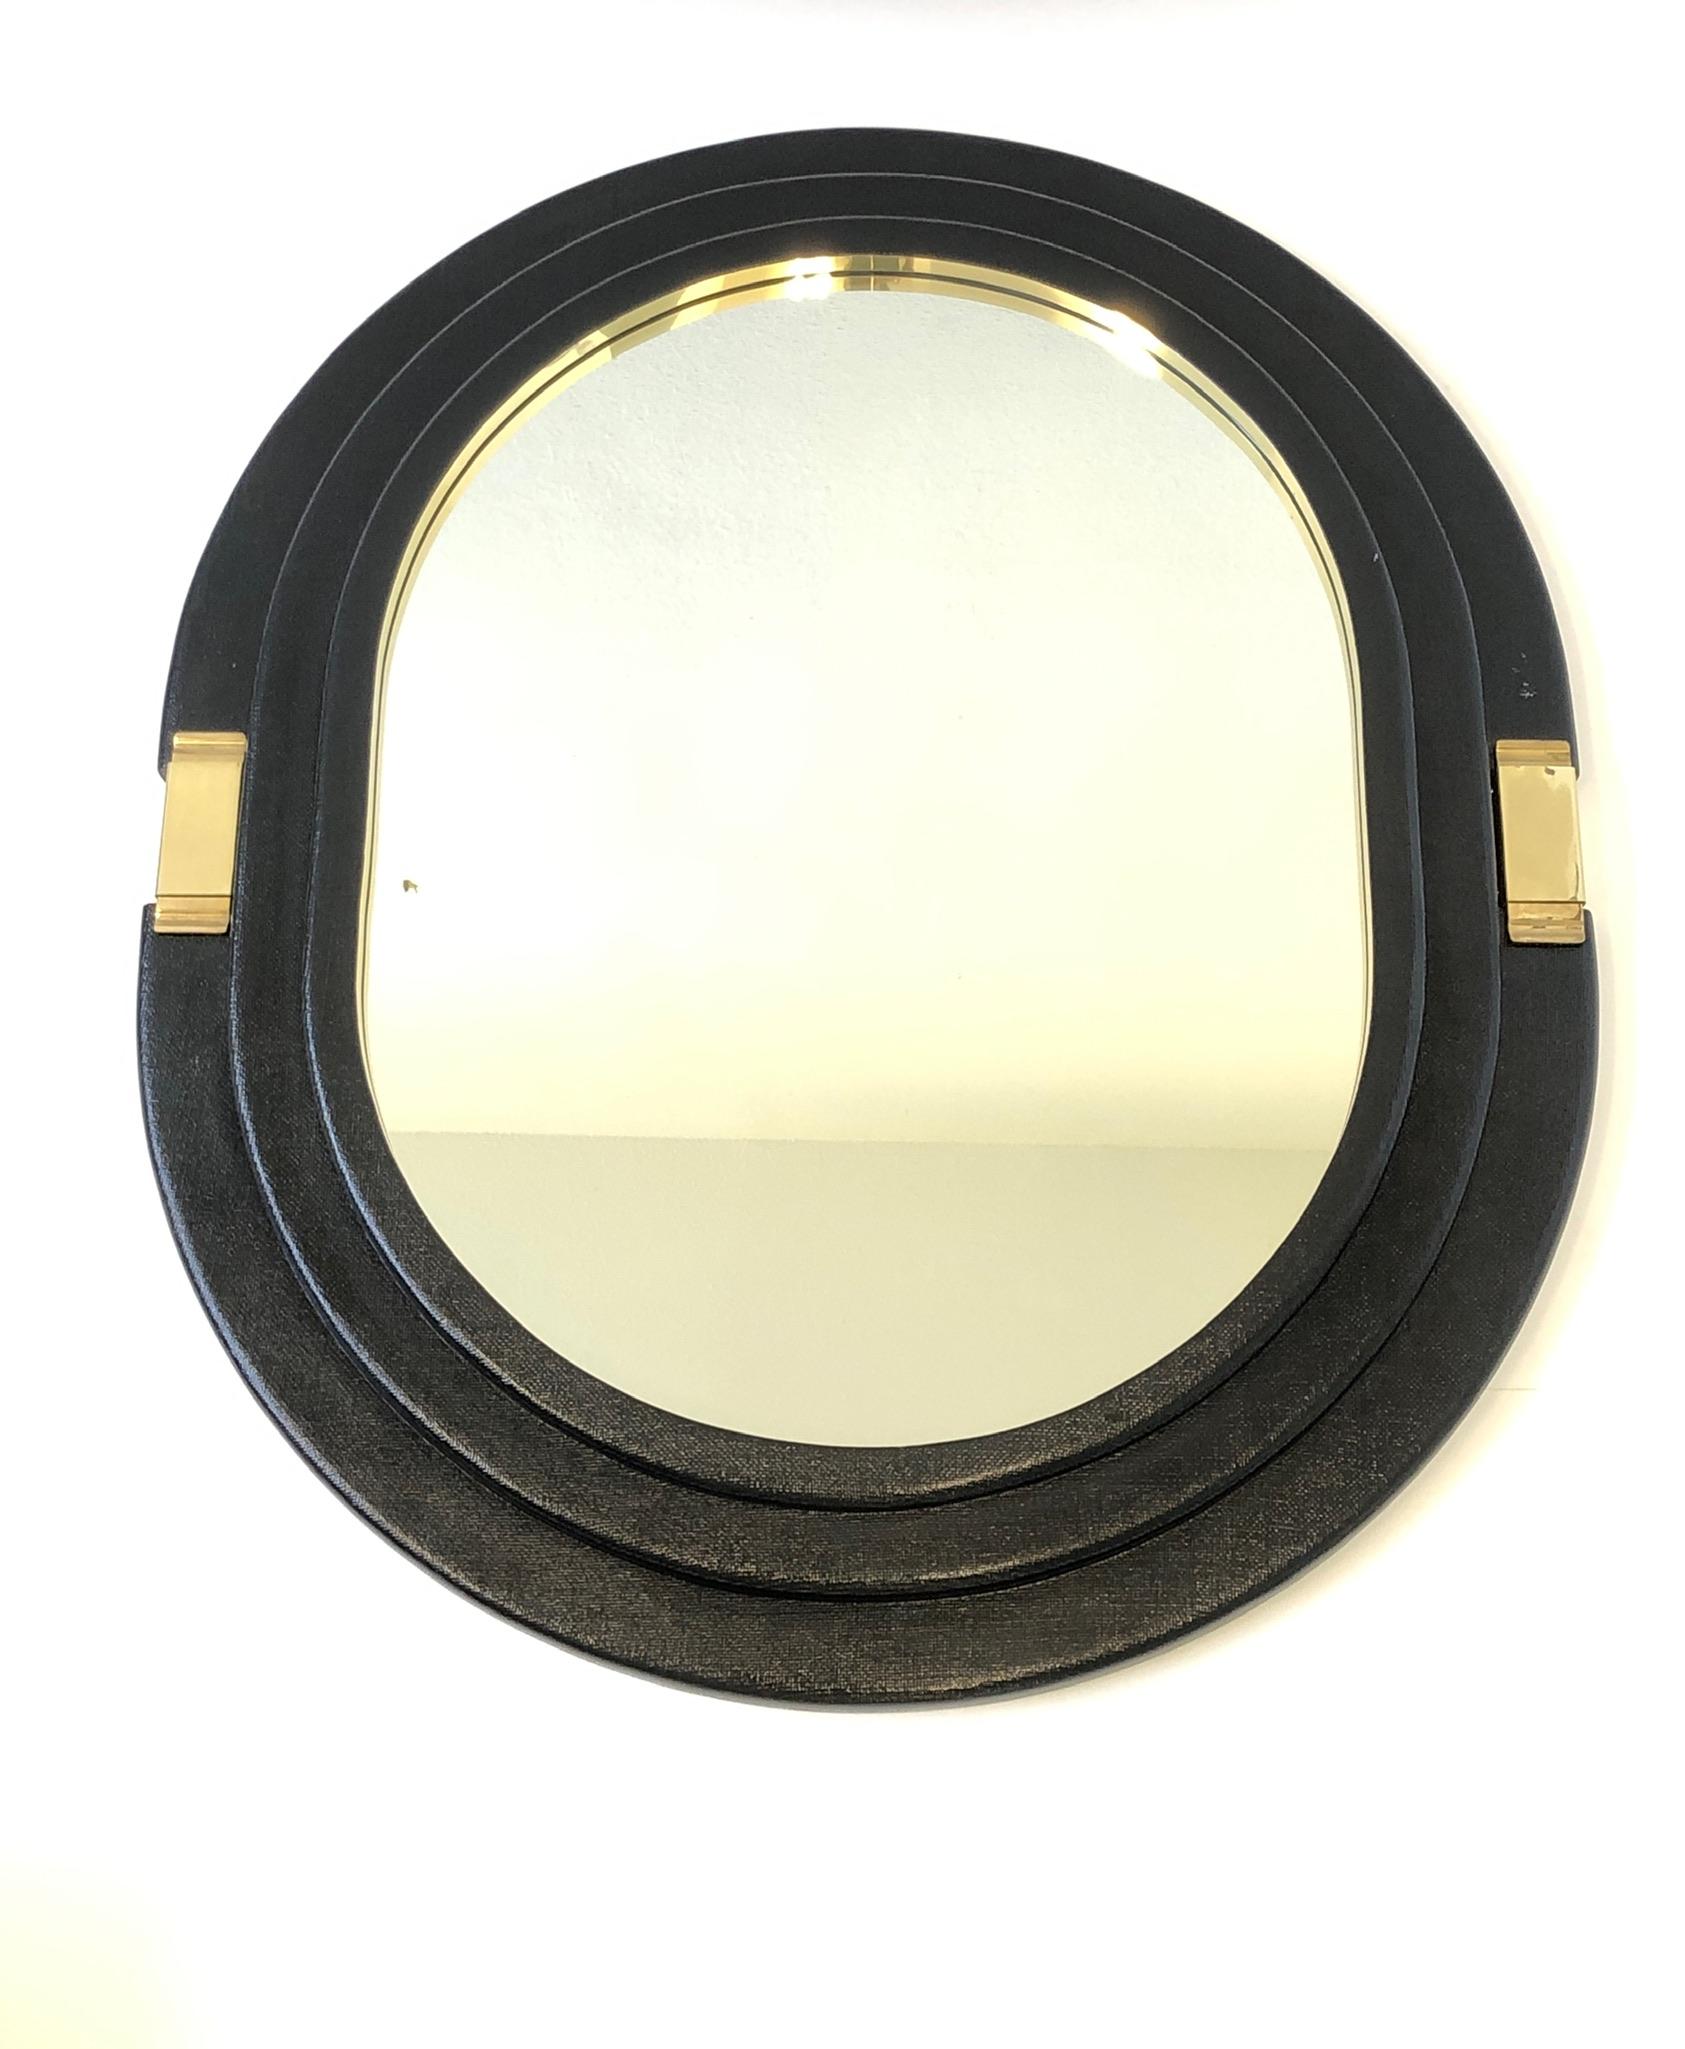 A glamorous black lacquered Linen and polished brass oval mirror from the 1980’s. The frame is constructed of wood wrapped in linen and black lacquered with polished brass details. 

Measurements: 39” wide, 46.5” high and 3.25” deep.